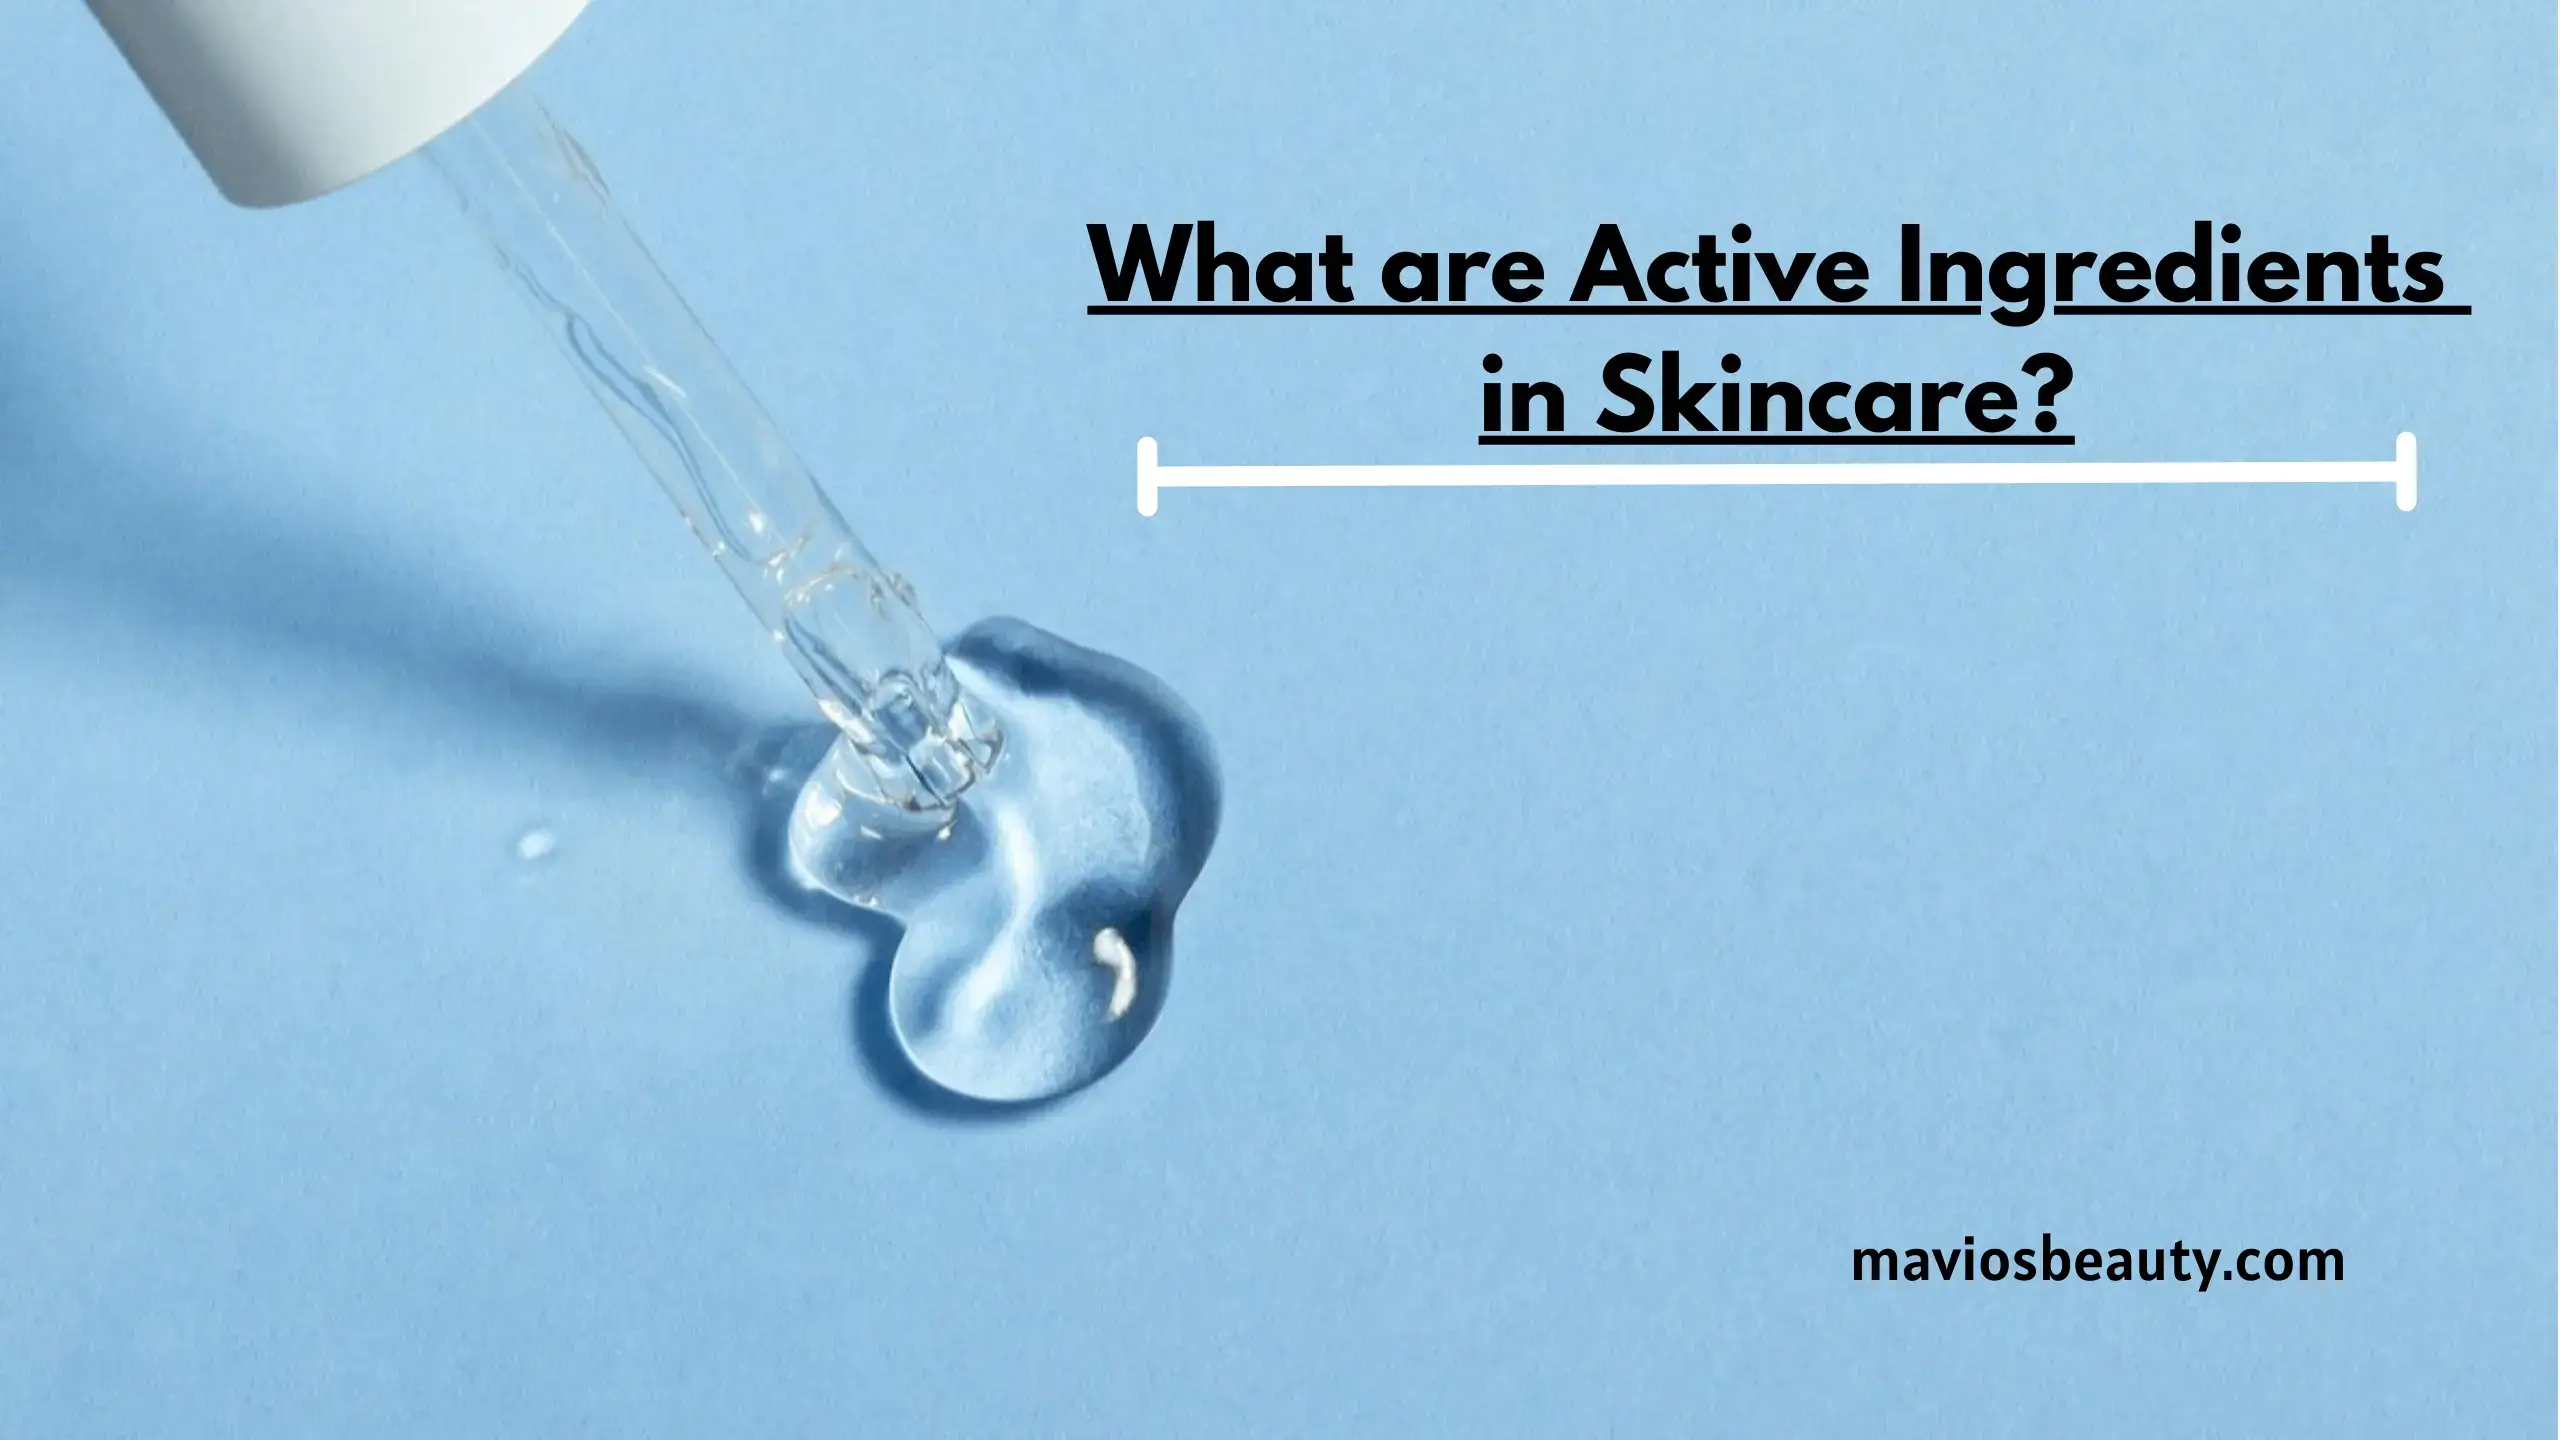 What are Active Ingredients in Skincare?